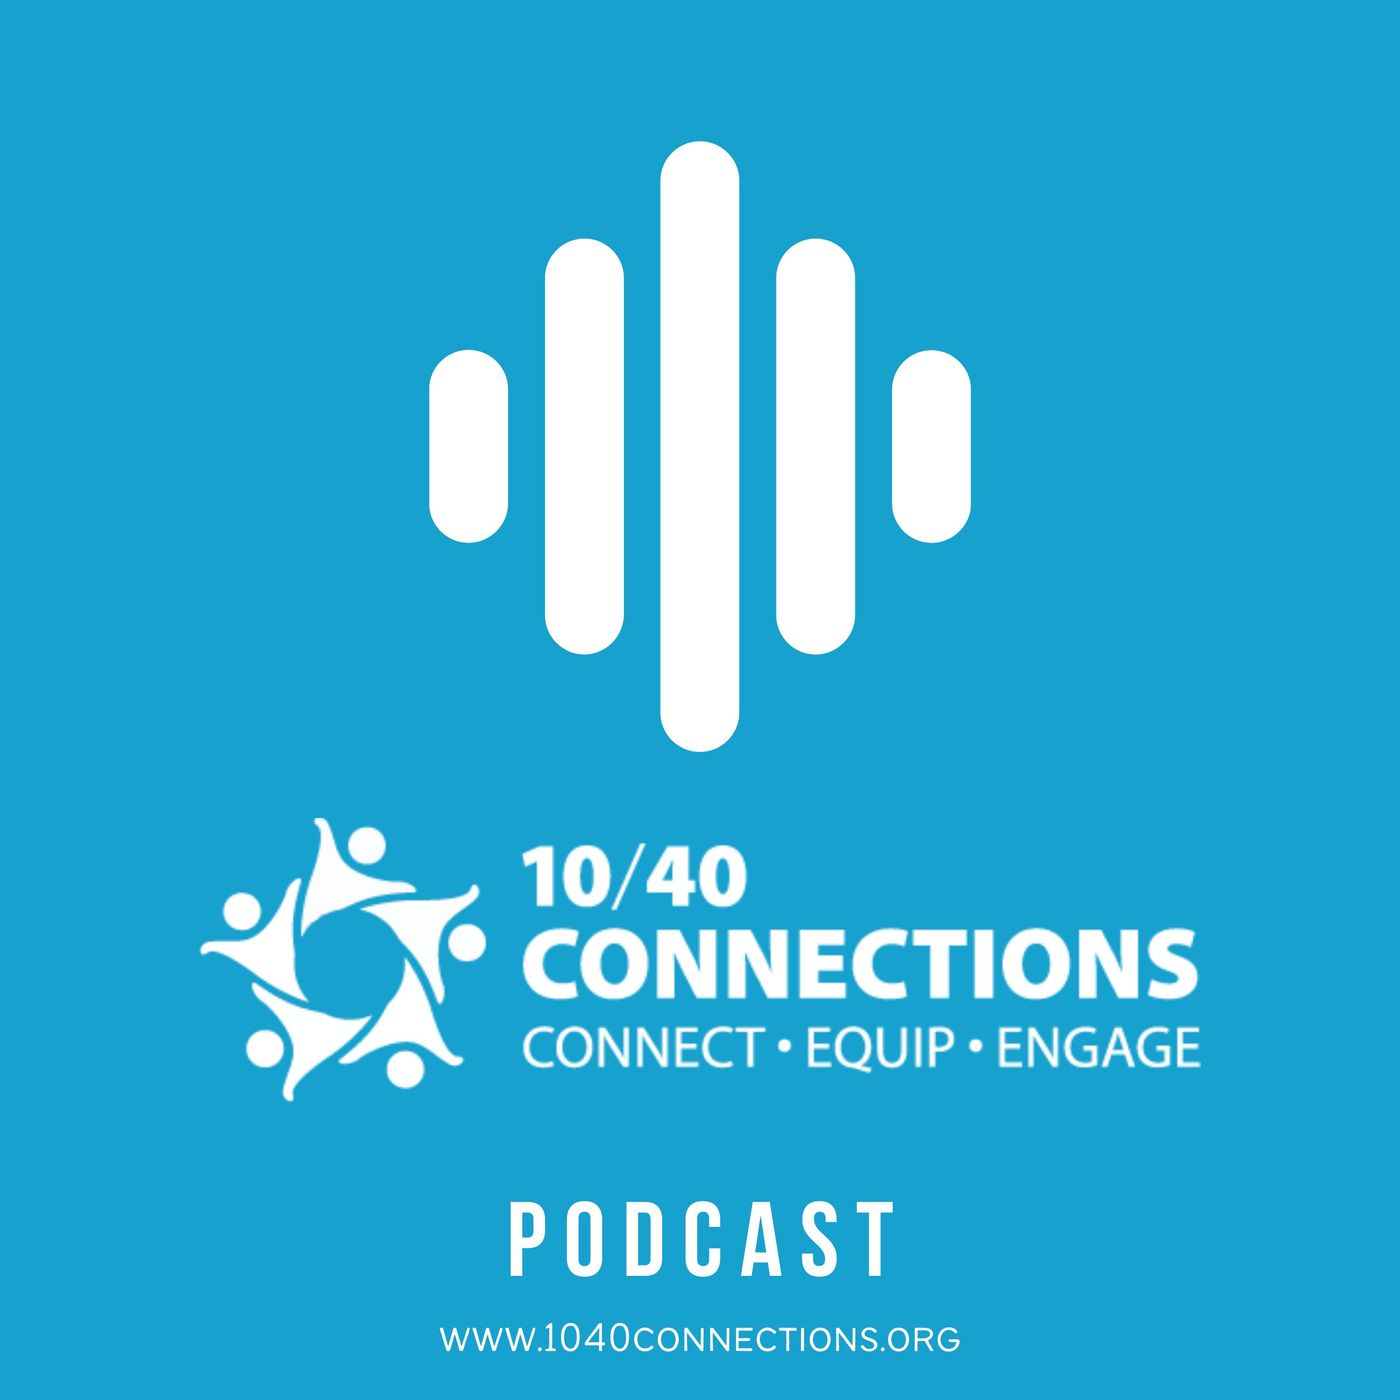 10/40 Connections